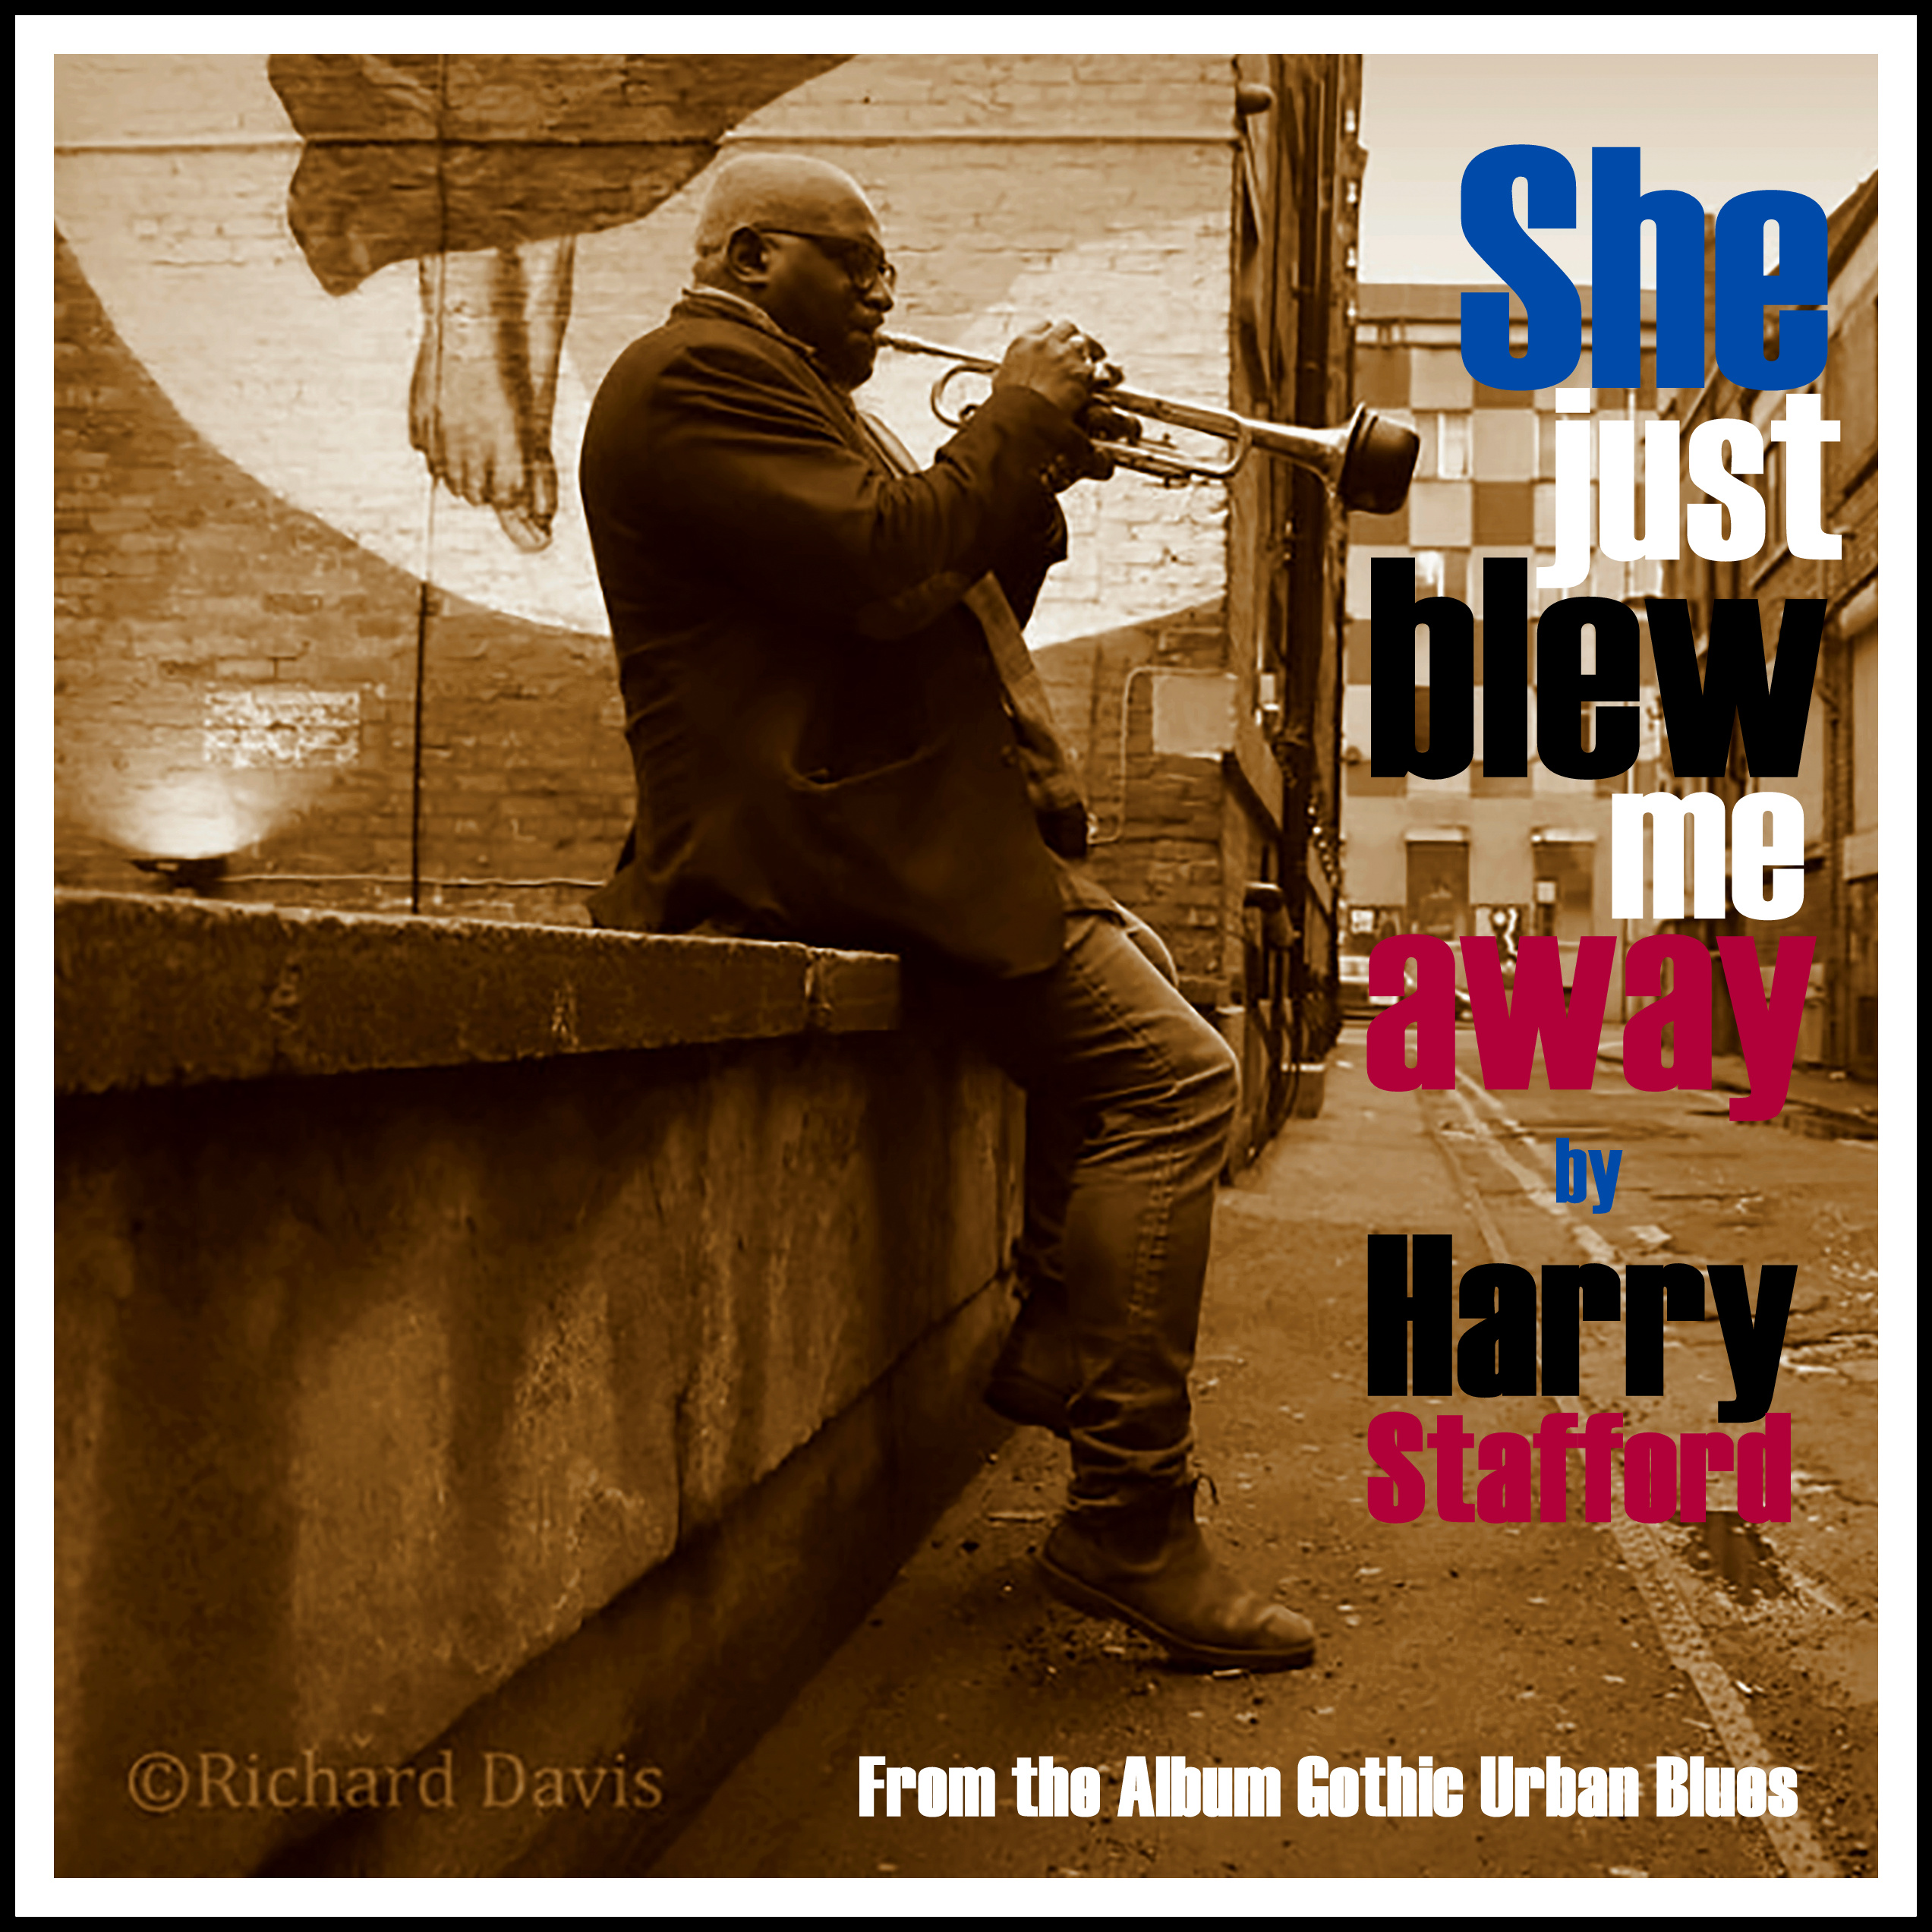 Stereo Embers’ TRACK OF THE DAY: Harry Stafford’s “She Just Blew Me Away”